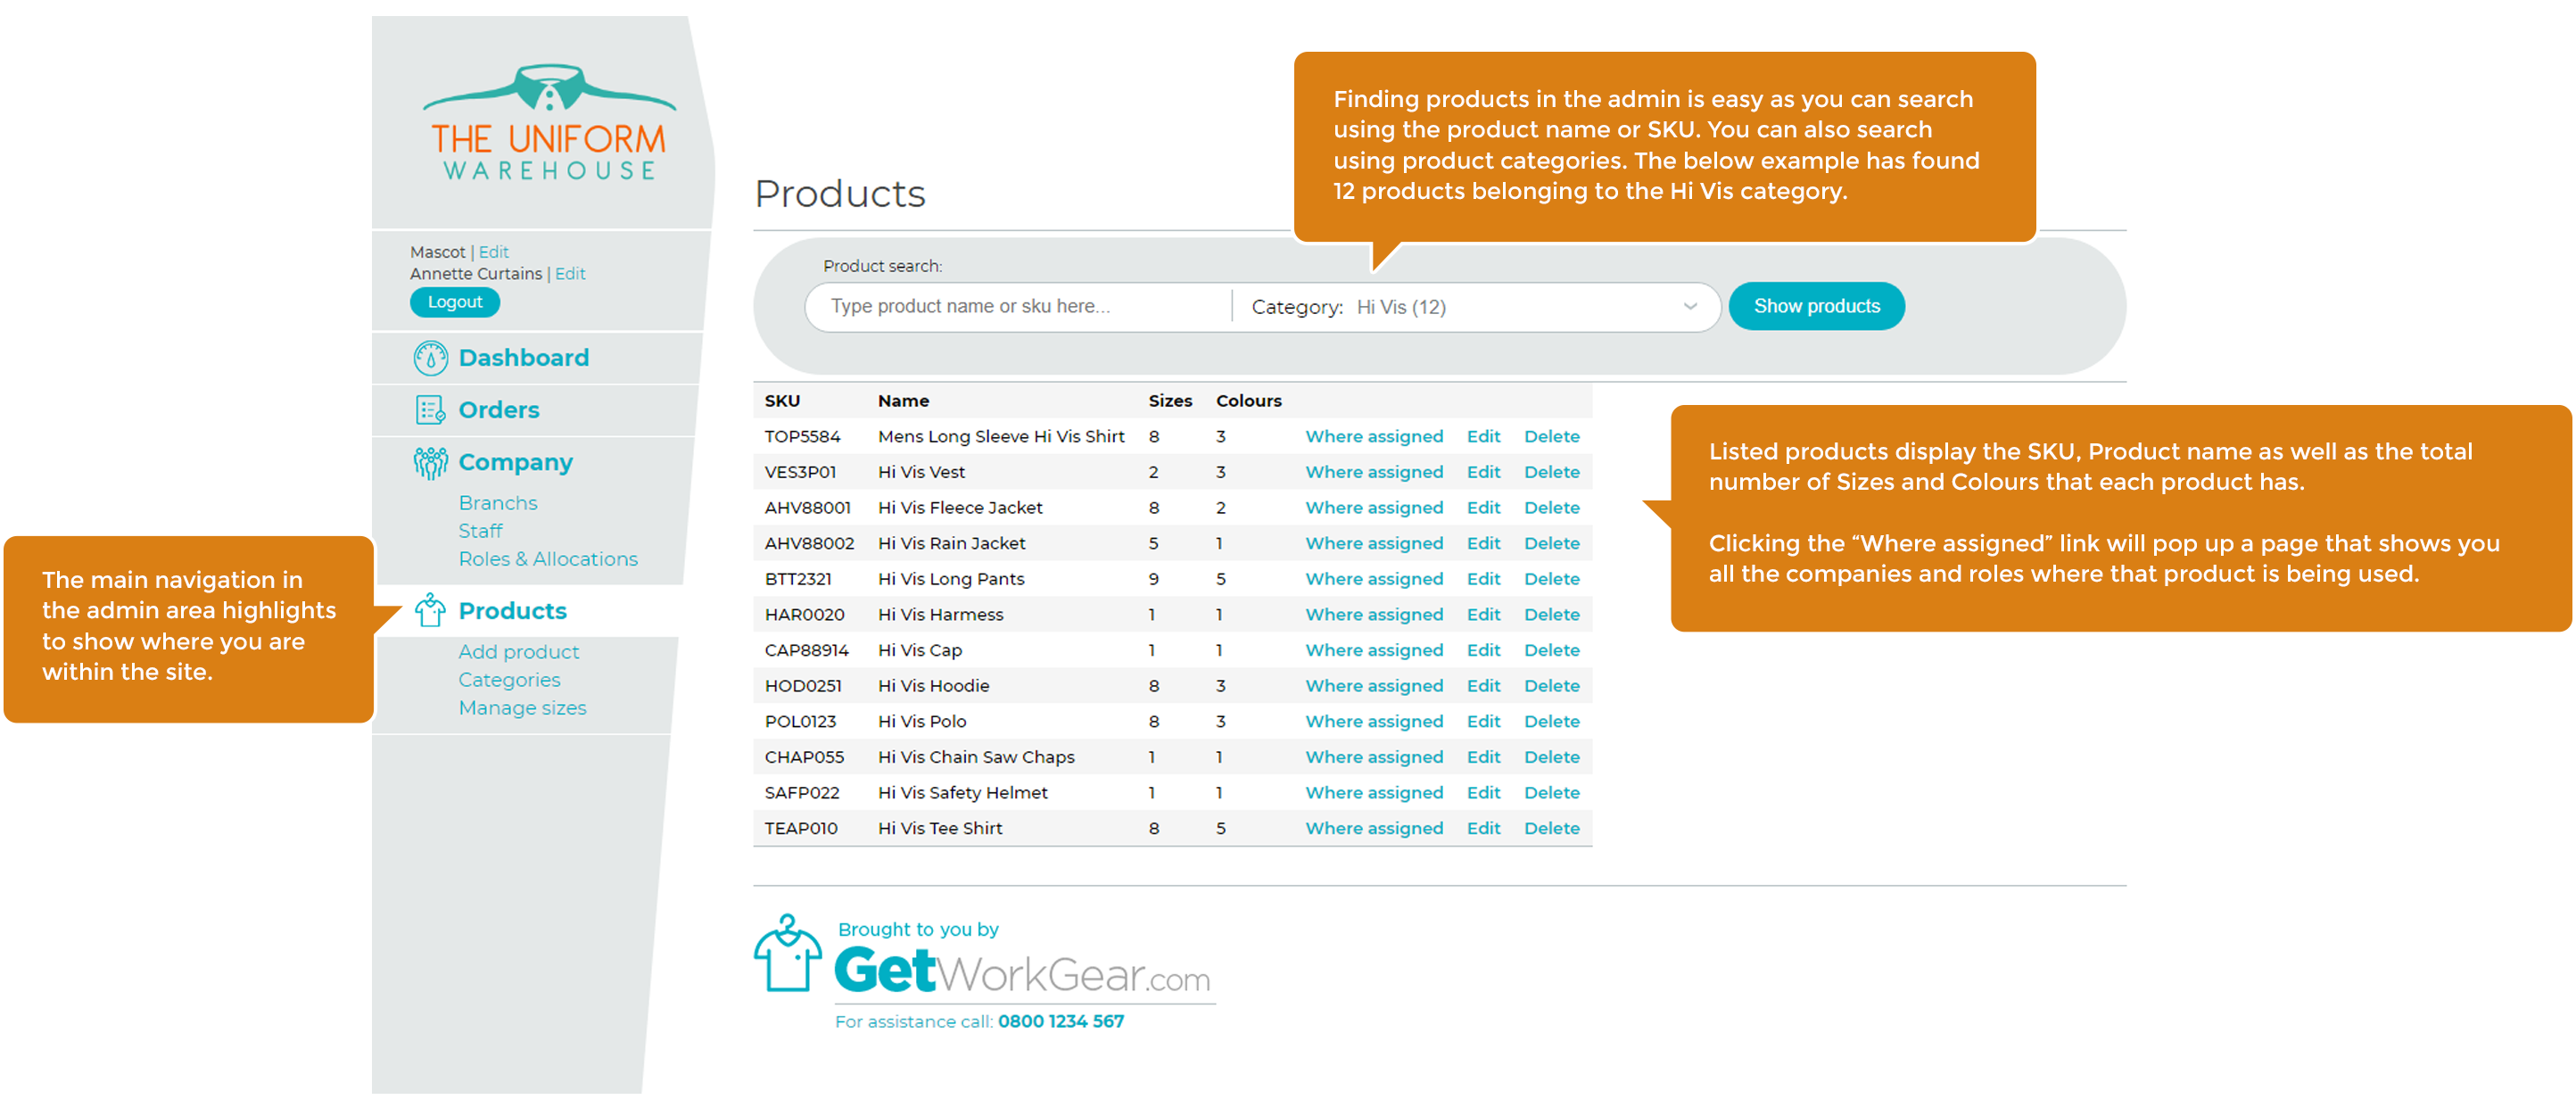 Products search and overview.